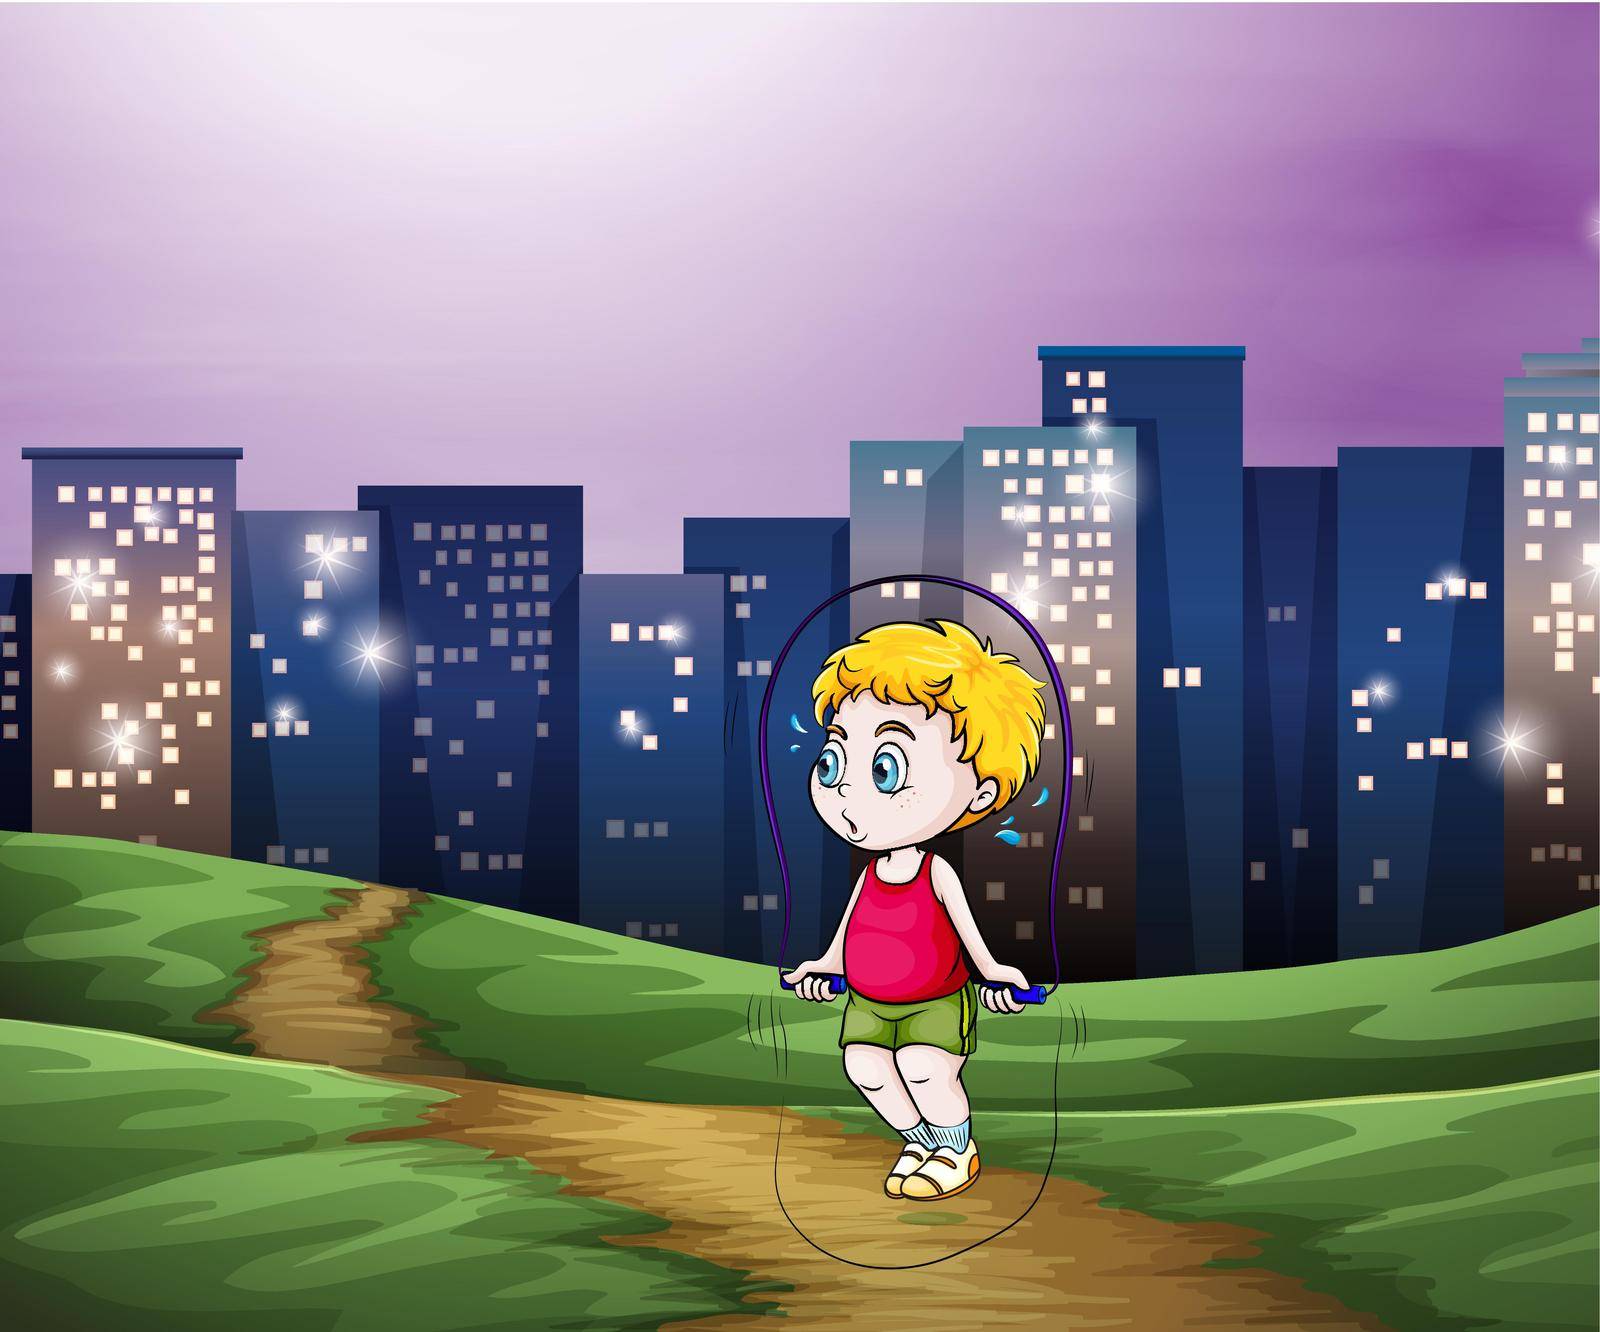 Illustration of a young boy playing across the tall buildings in the city